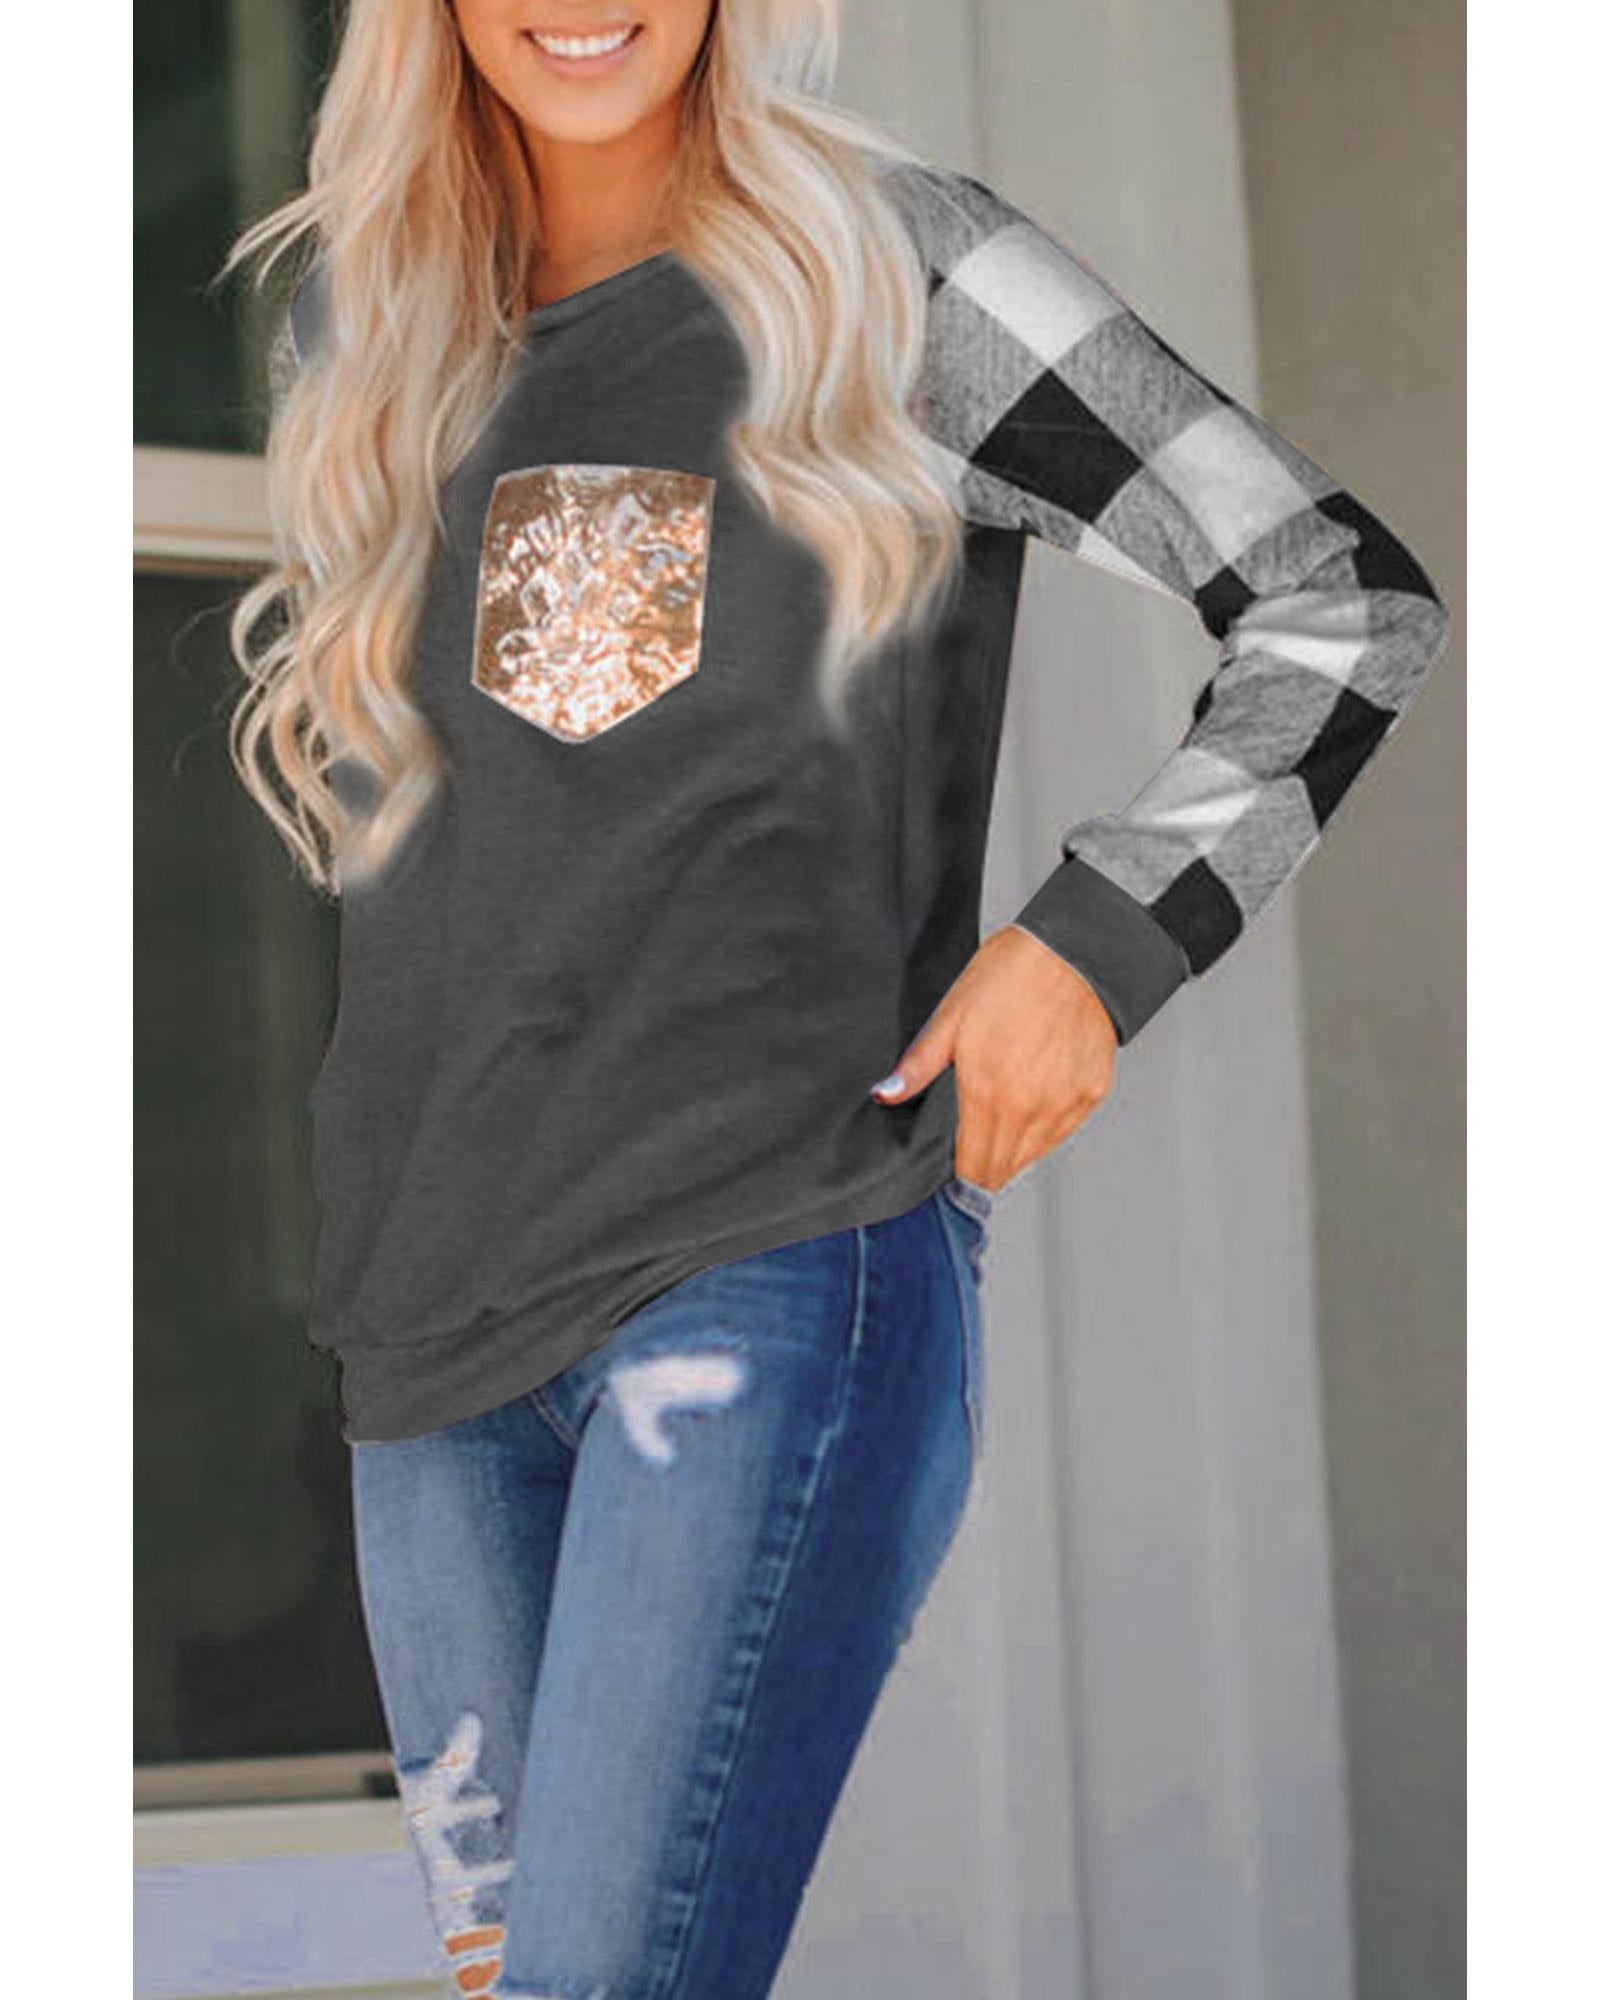 Sequined Pocket Plaid Long Sleeve Top - 2XL